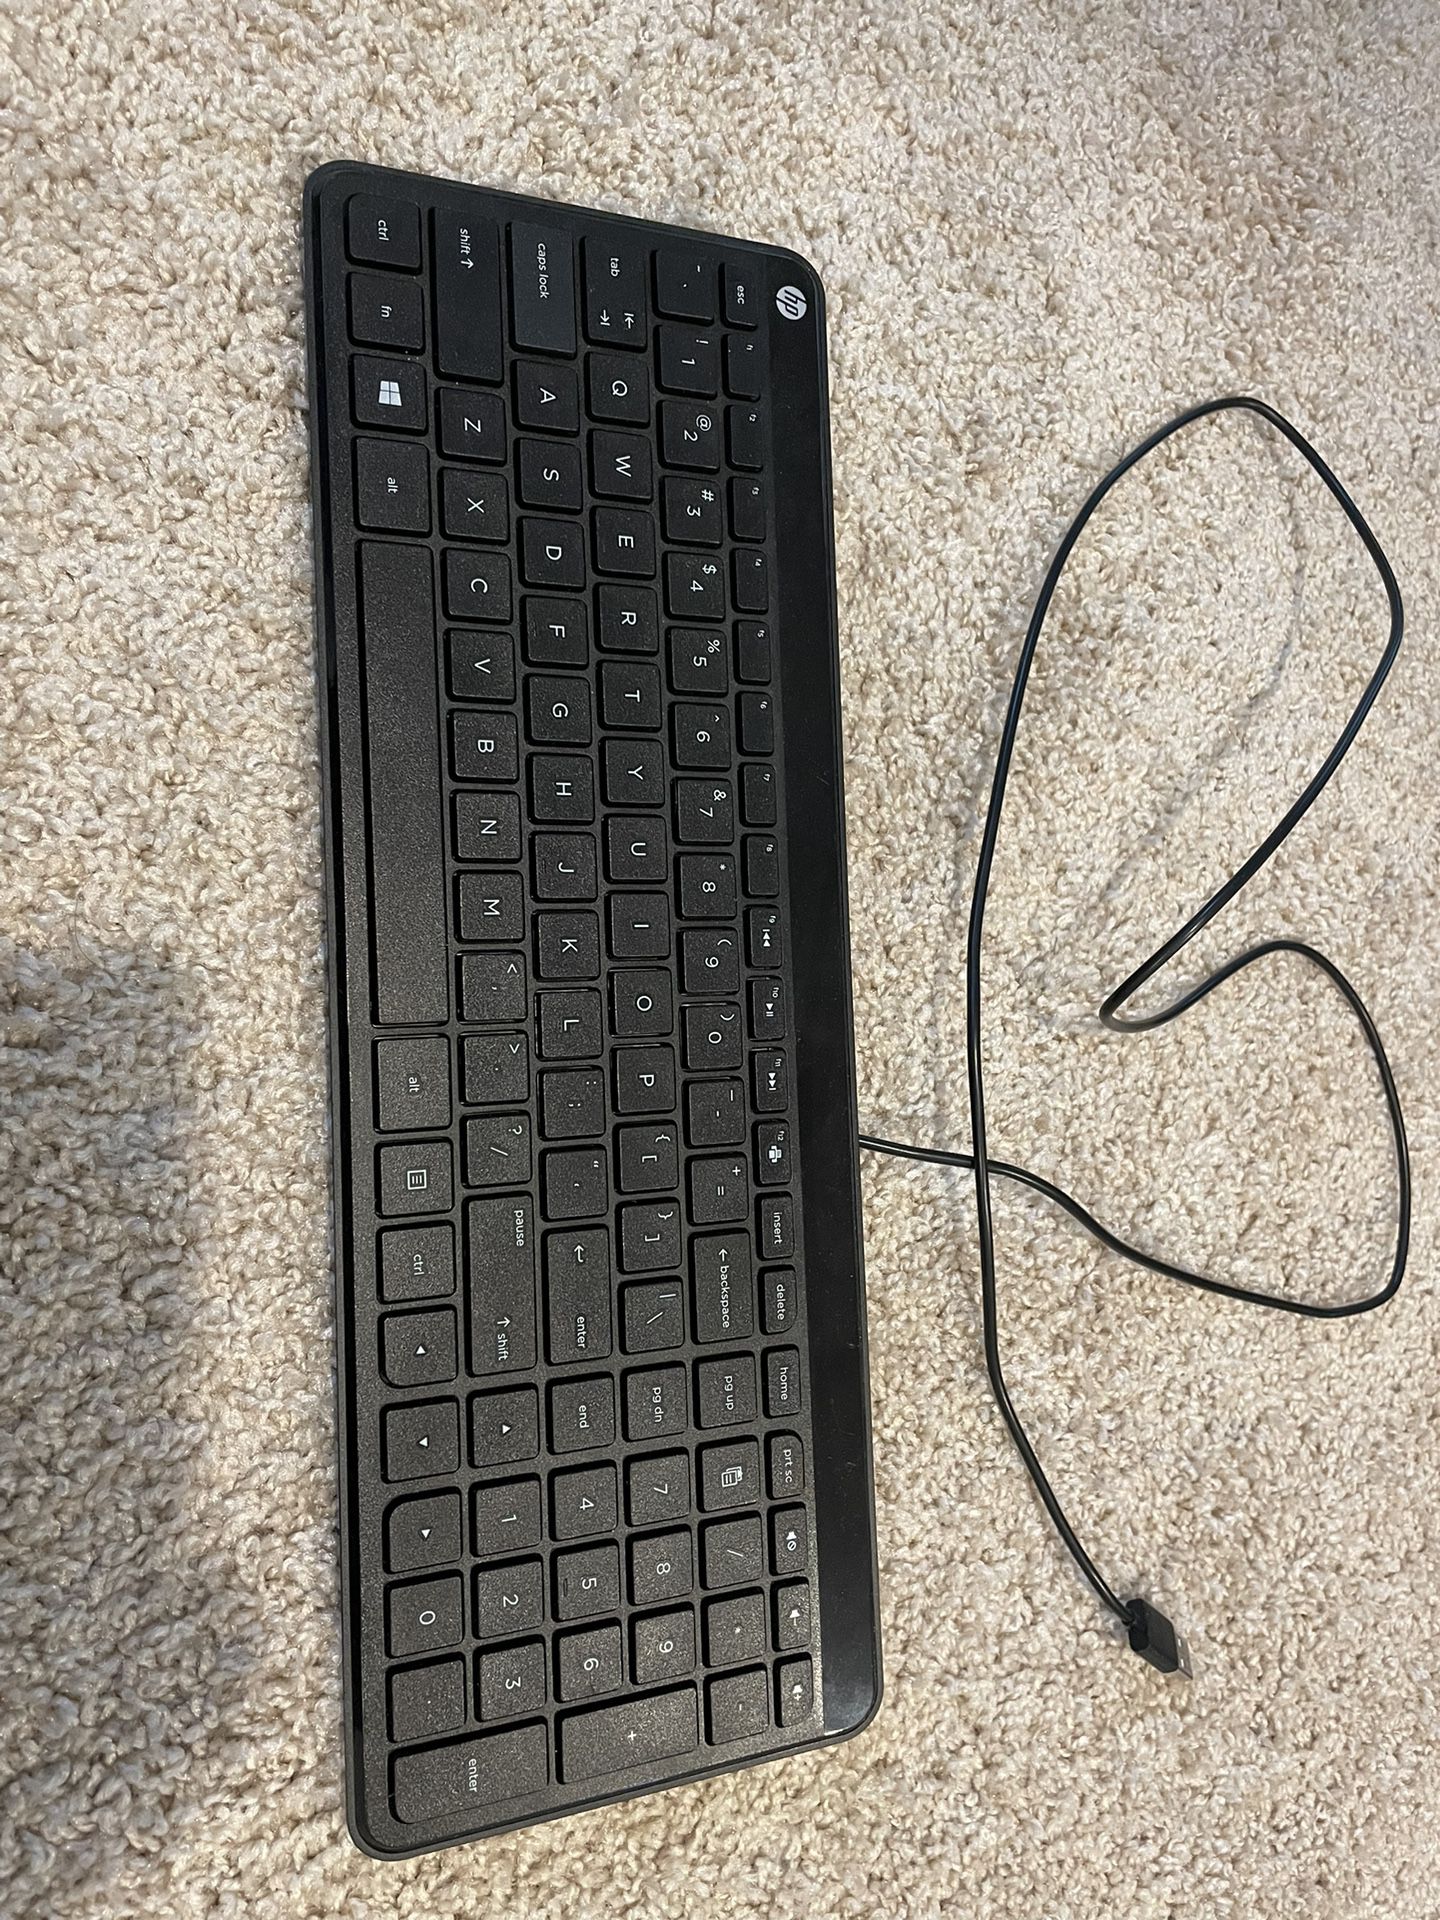 HP Keyboard & Mouse